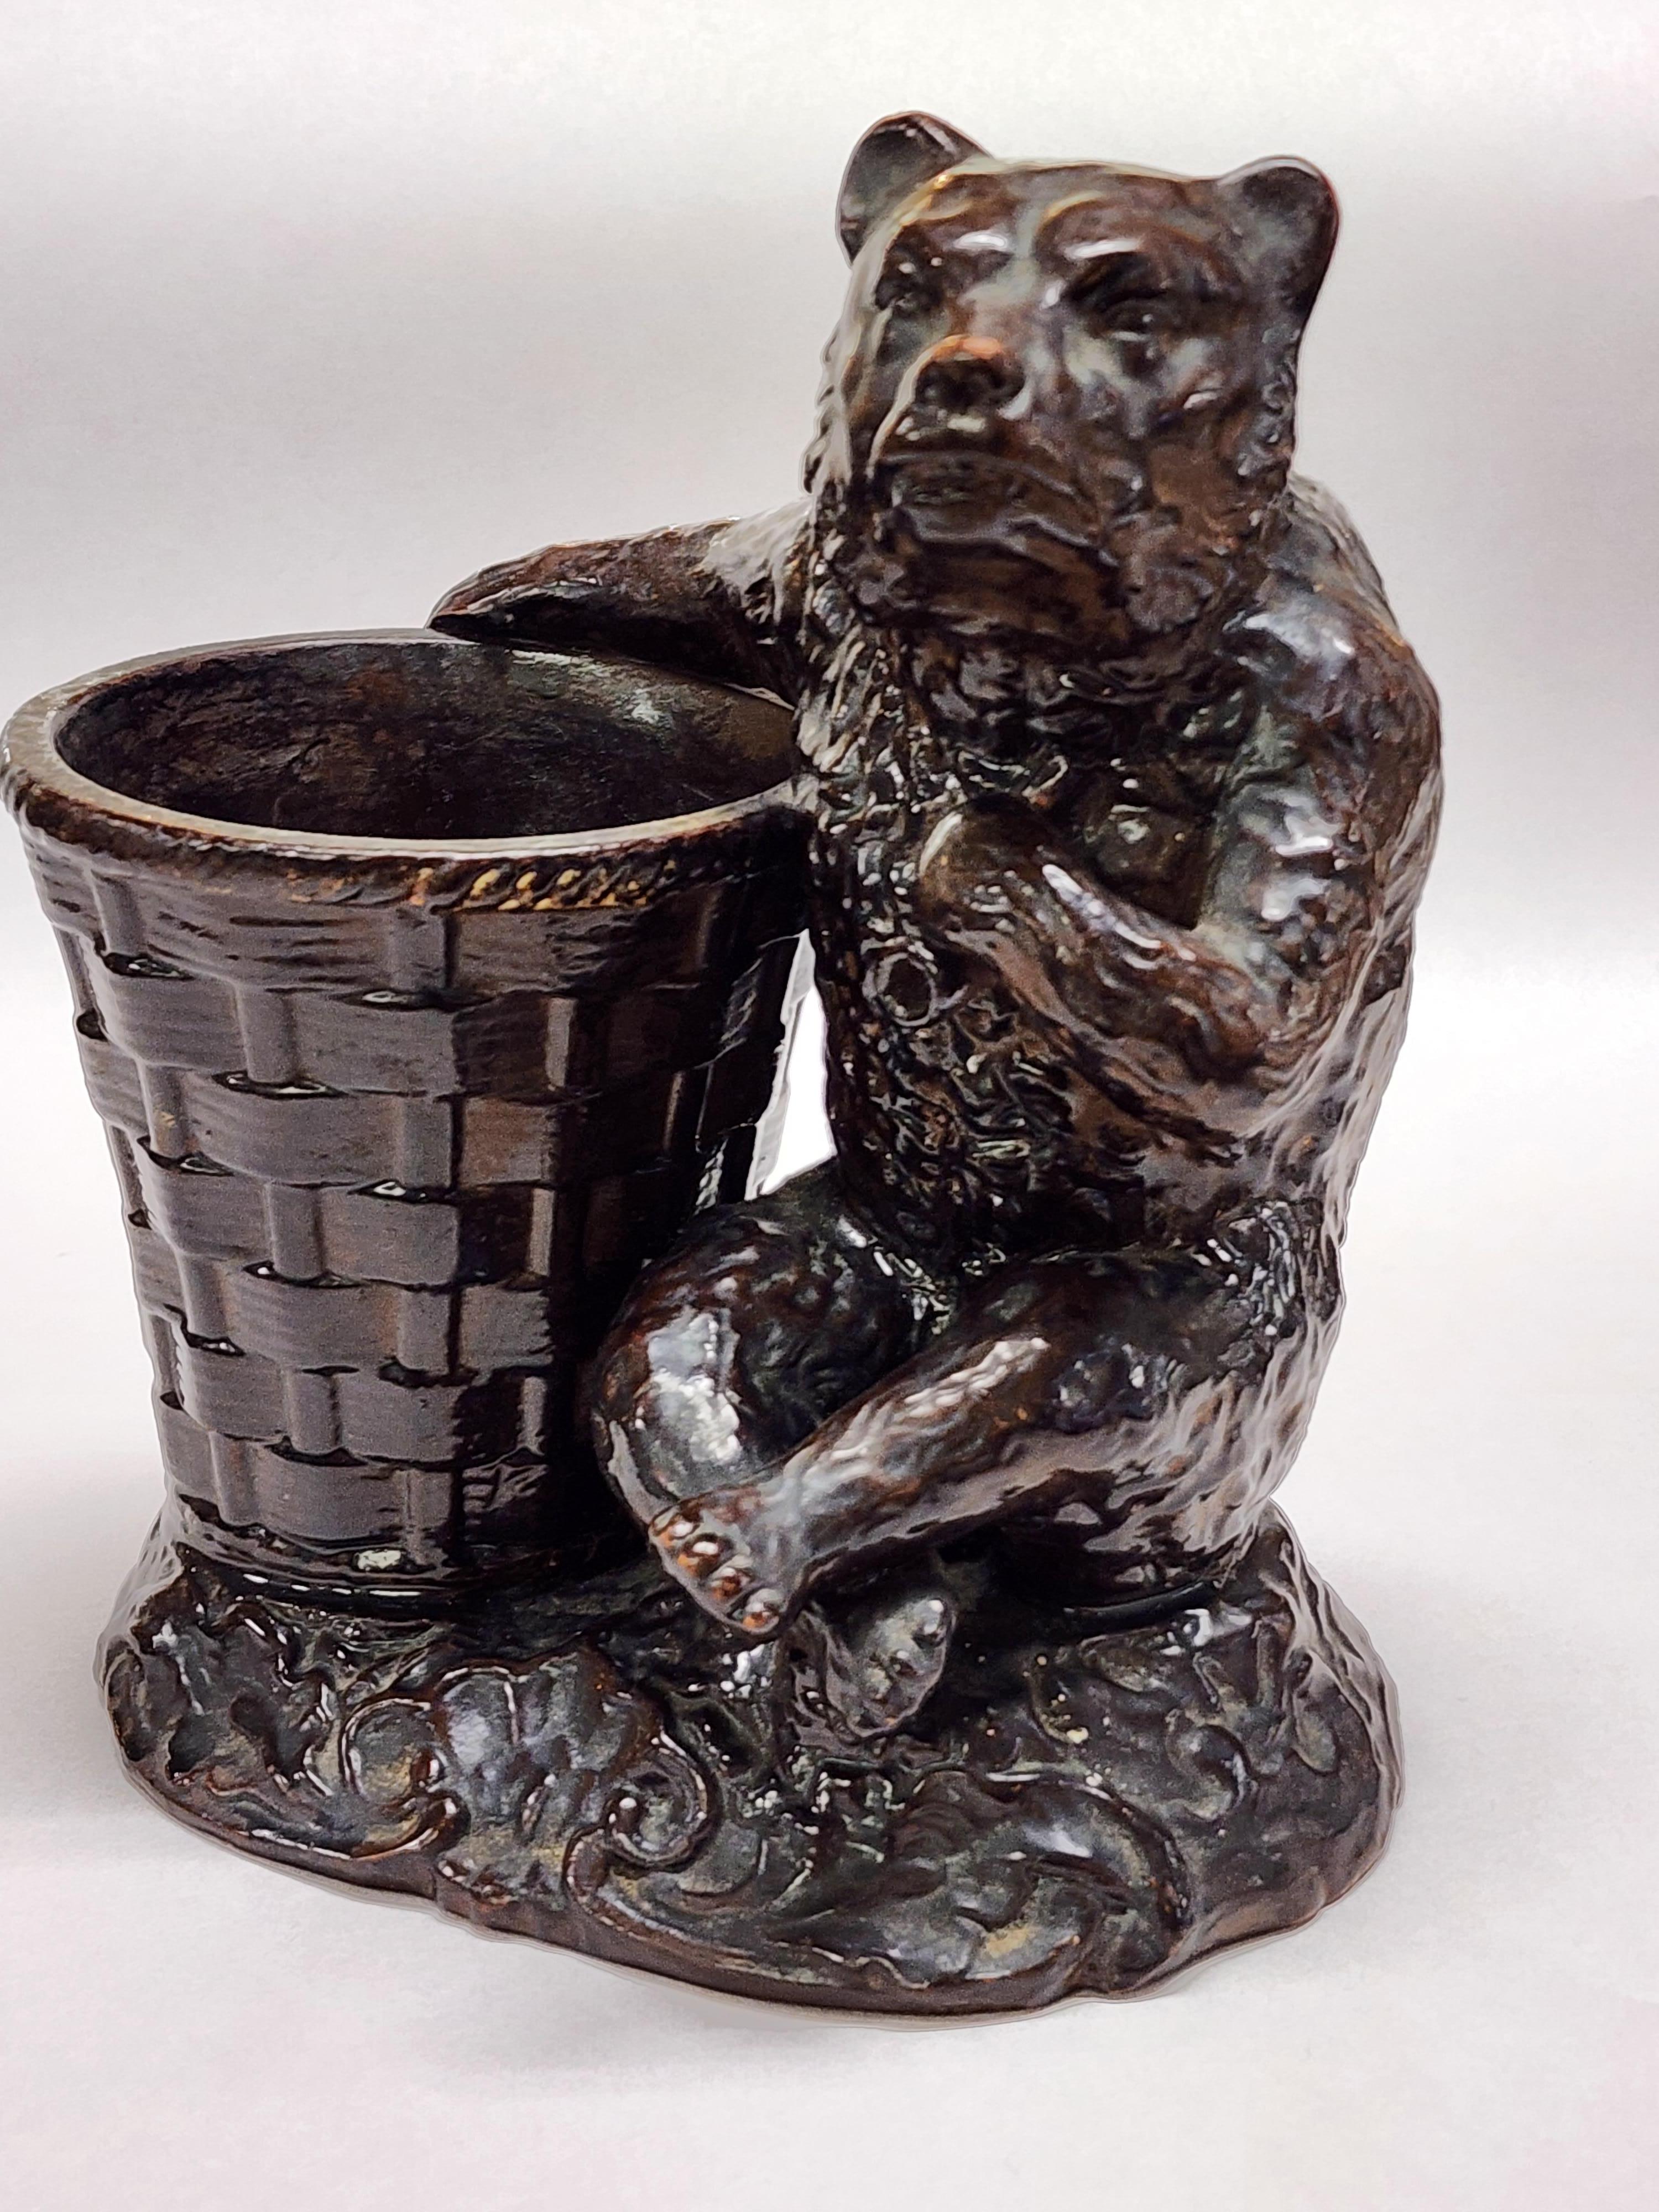 Rare victorian terracotta and pipe clay cigar holder, late nineteenth century. Produced by the J&C China company of Bavaria. 
Made for holding cigars. This playful bear with a growl on his face and pipe in his hand hearkens you forward to take a